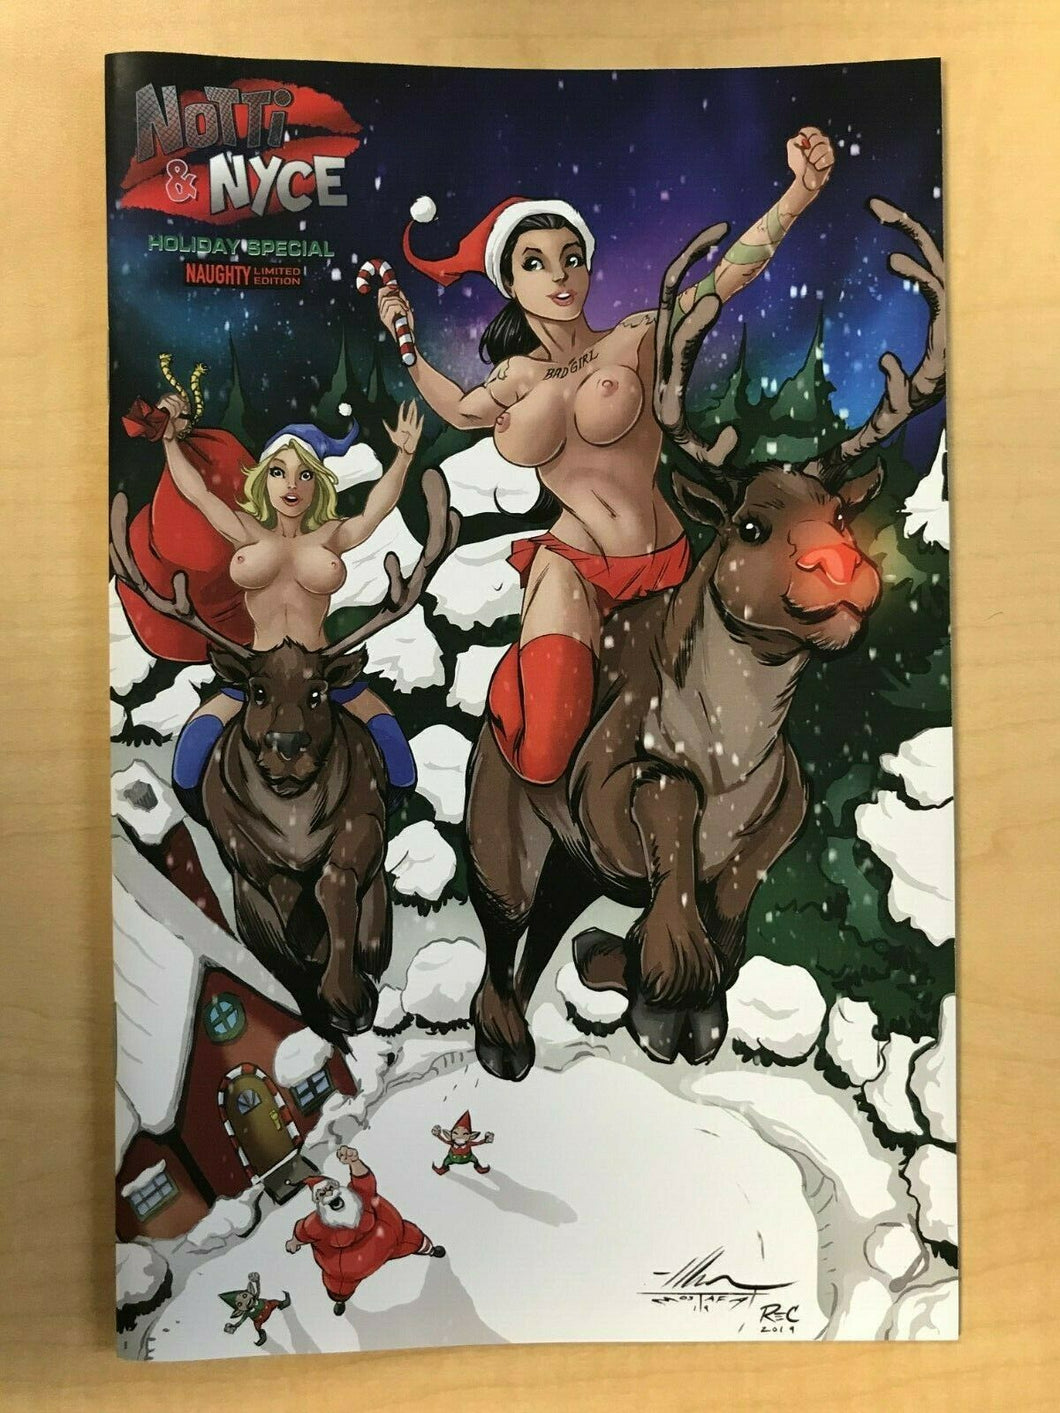 Notti & Nyce 2019 Christmas Holiday Special NAUGHTY Variant by Ale Garza